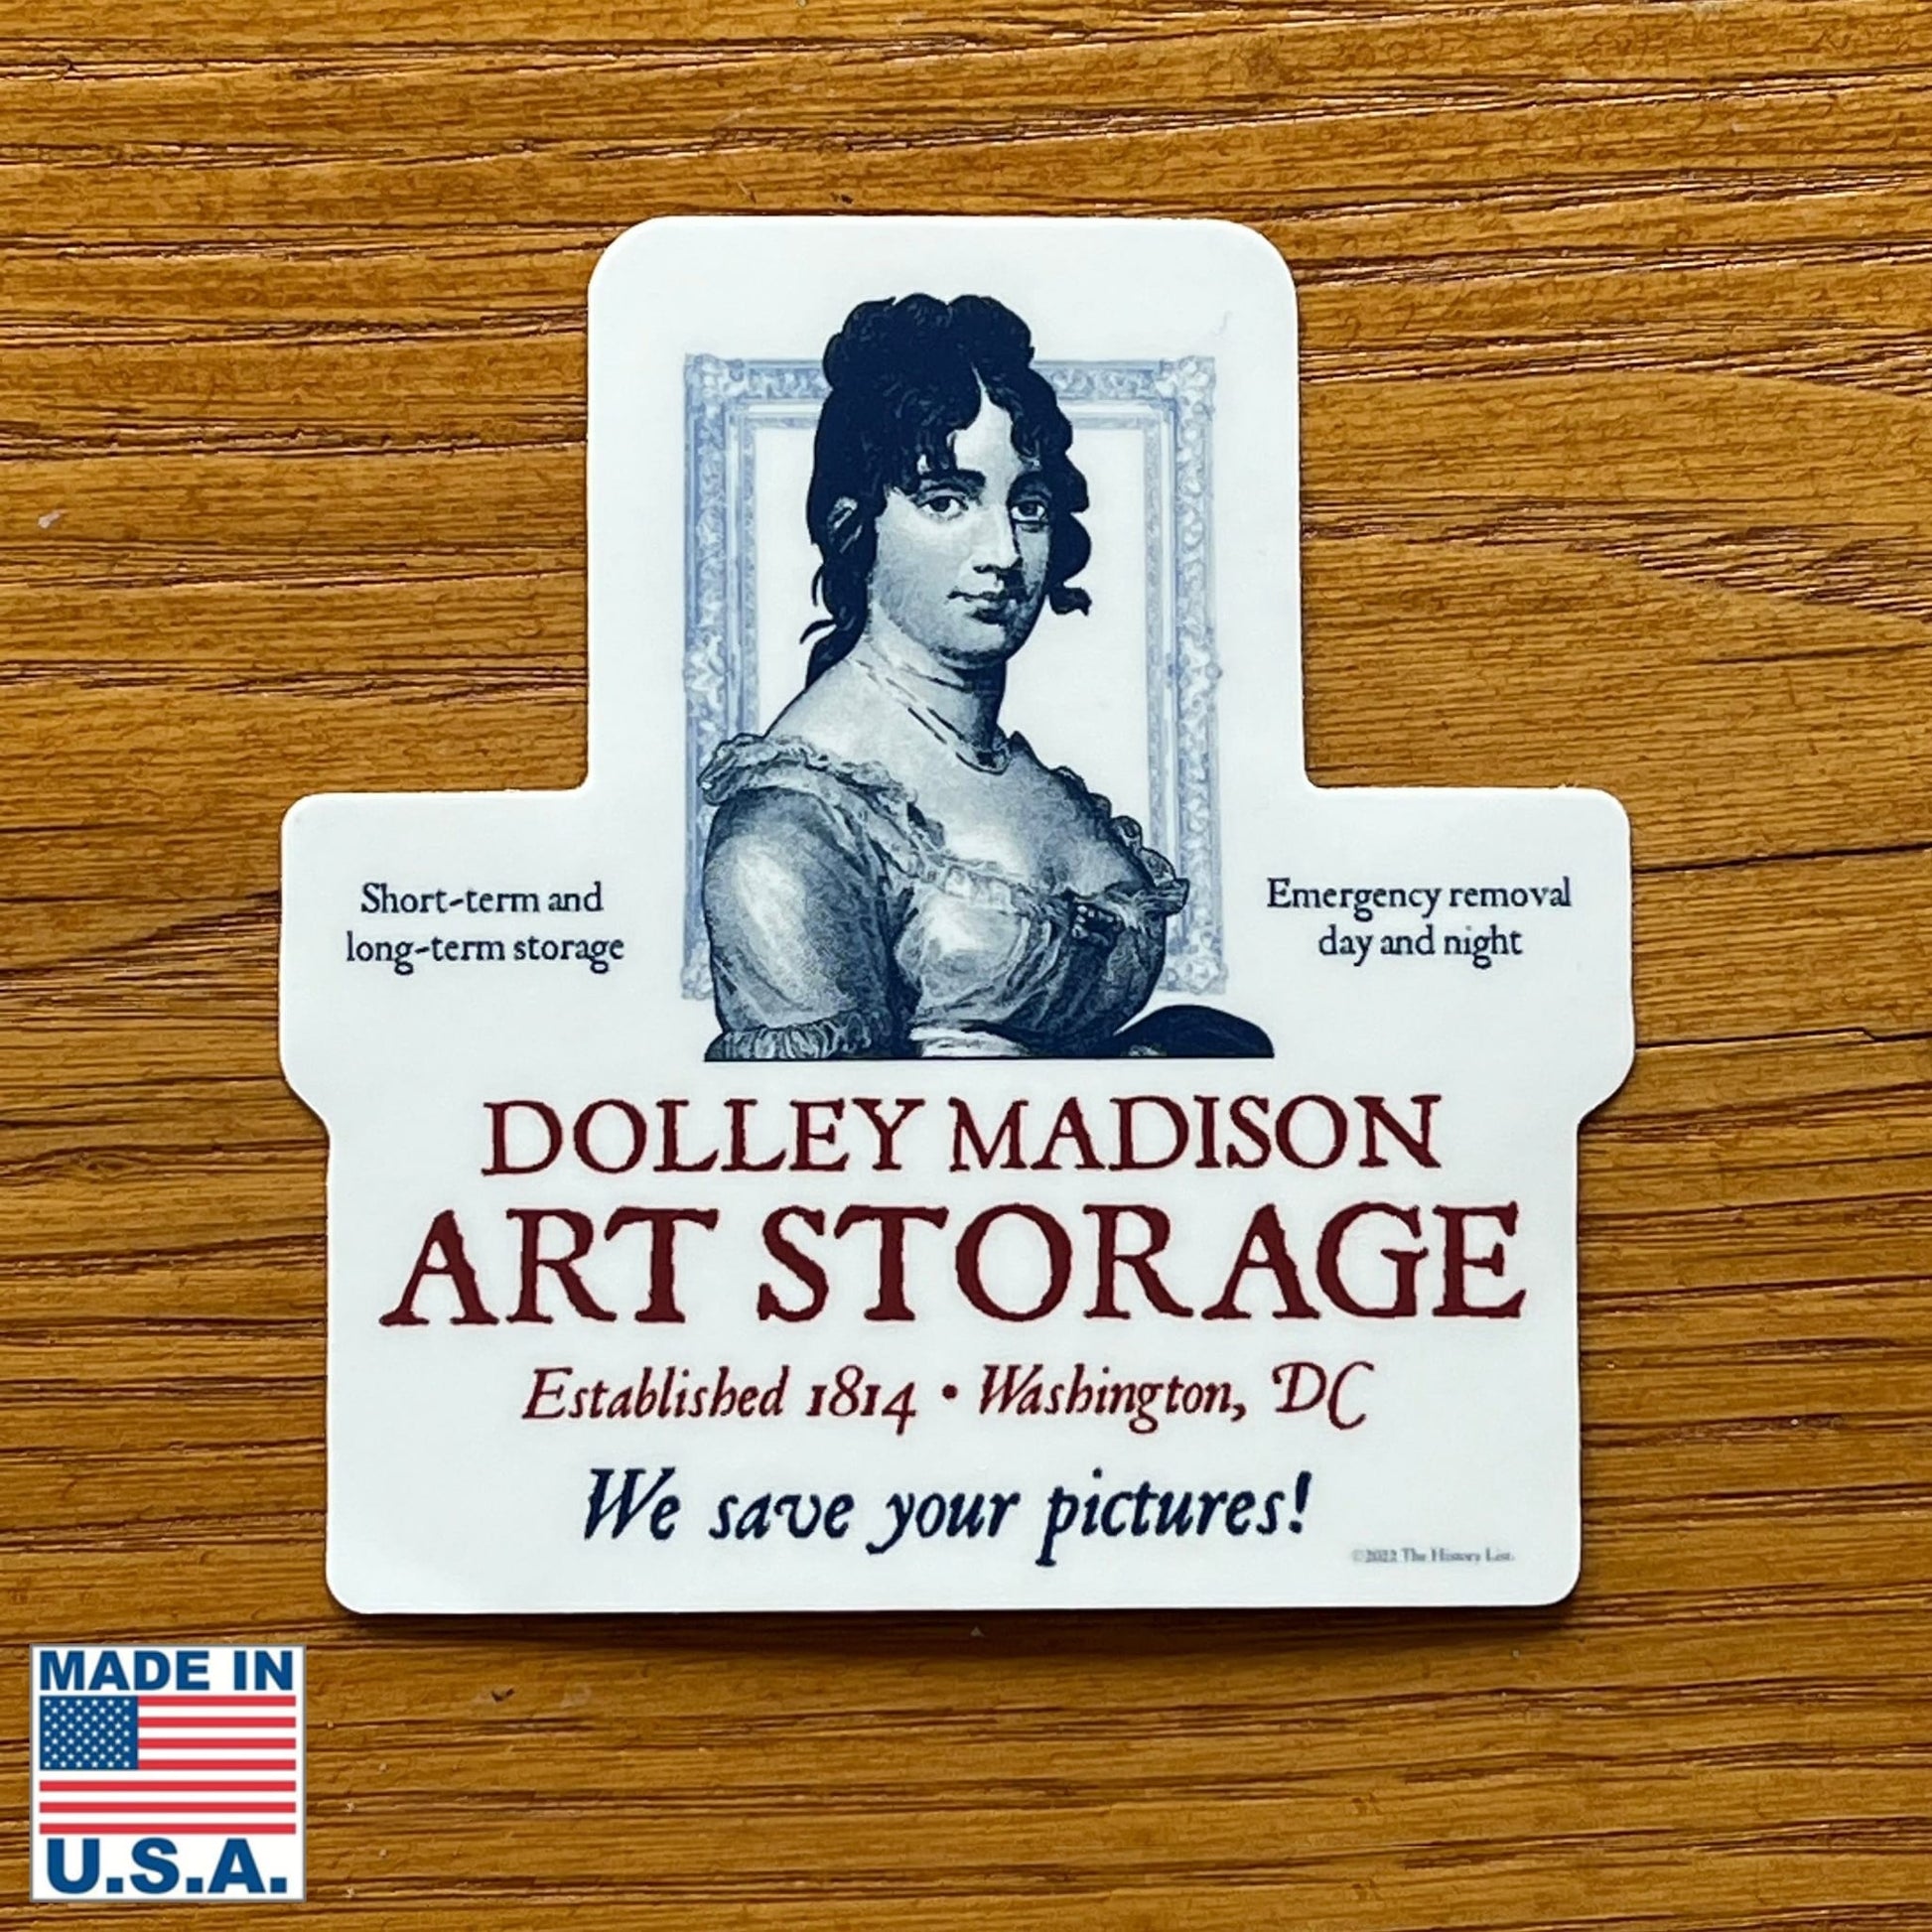 "Dolley Madison Art Storage" Sticker from the History List Store